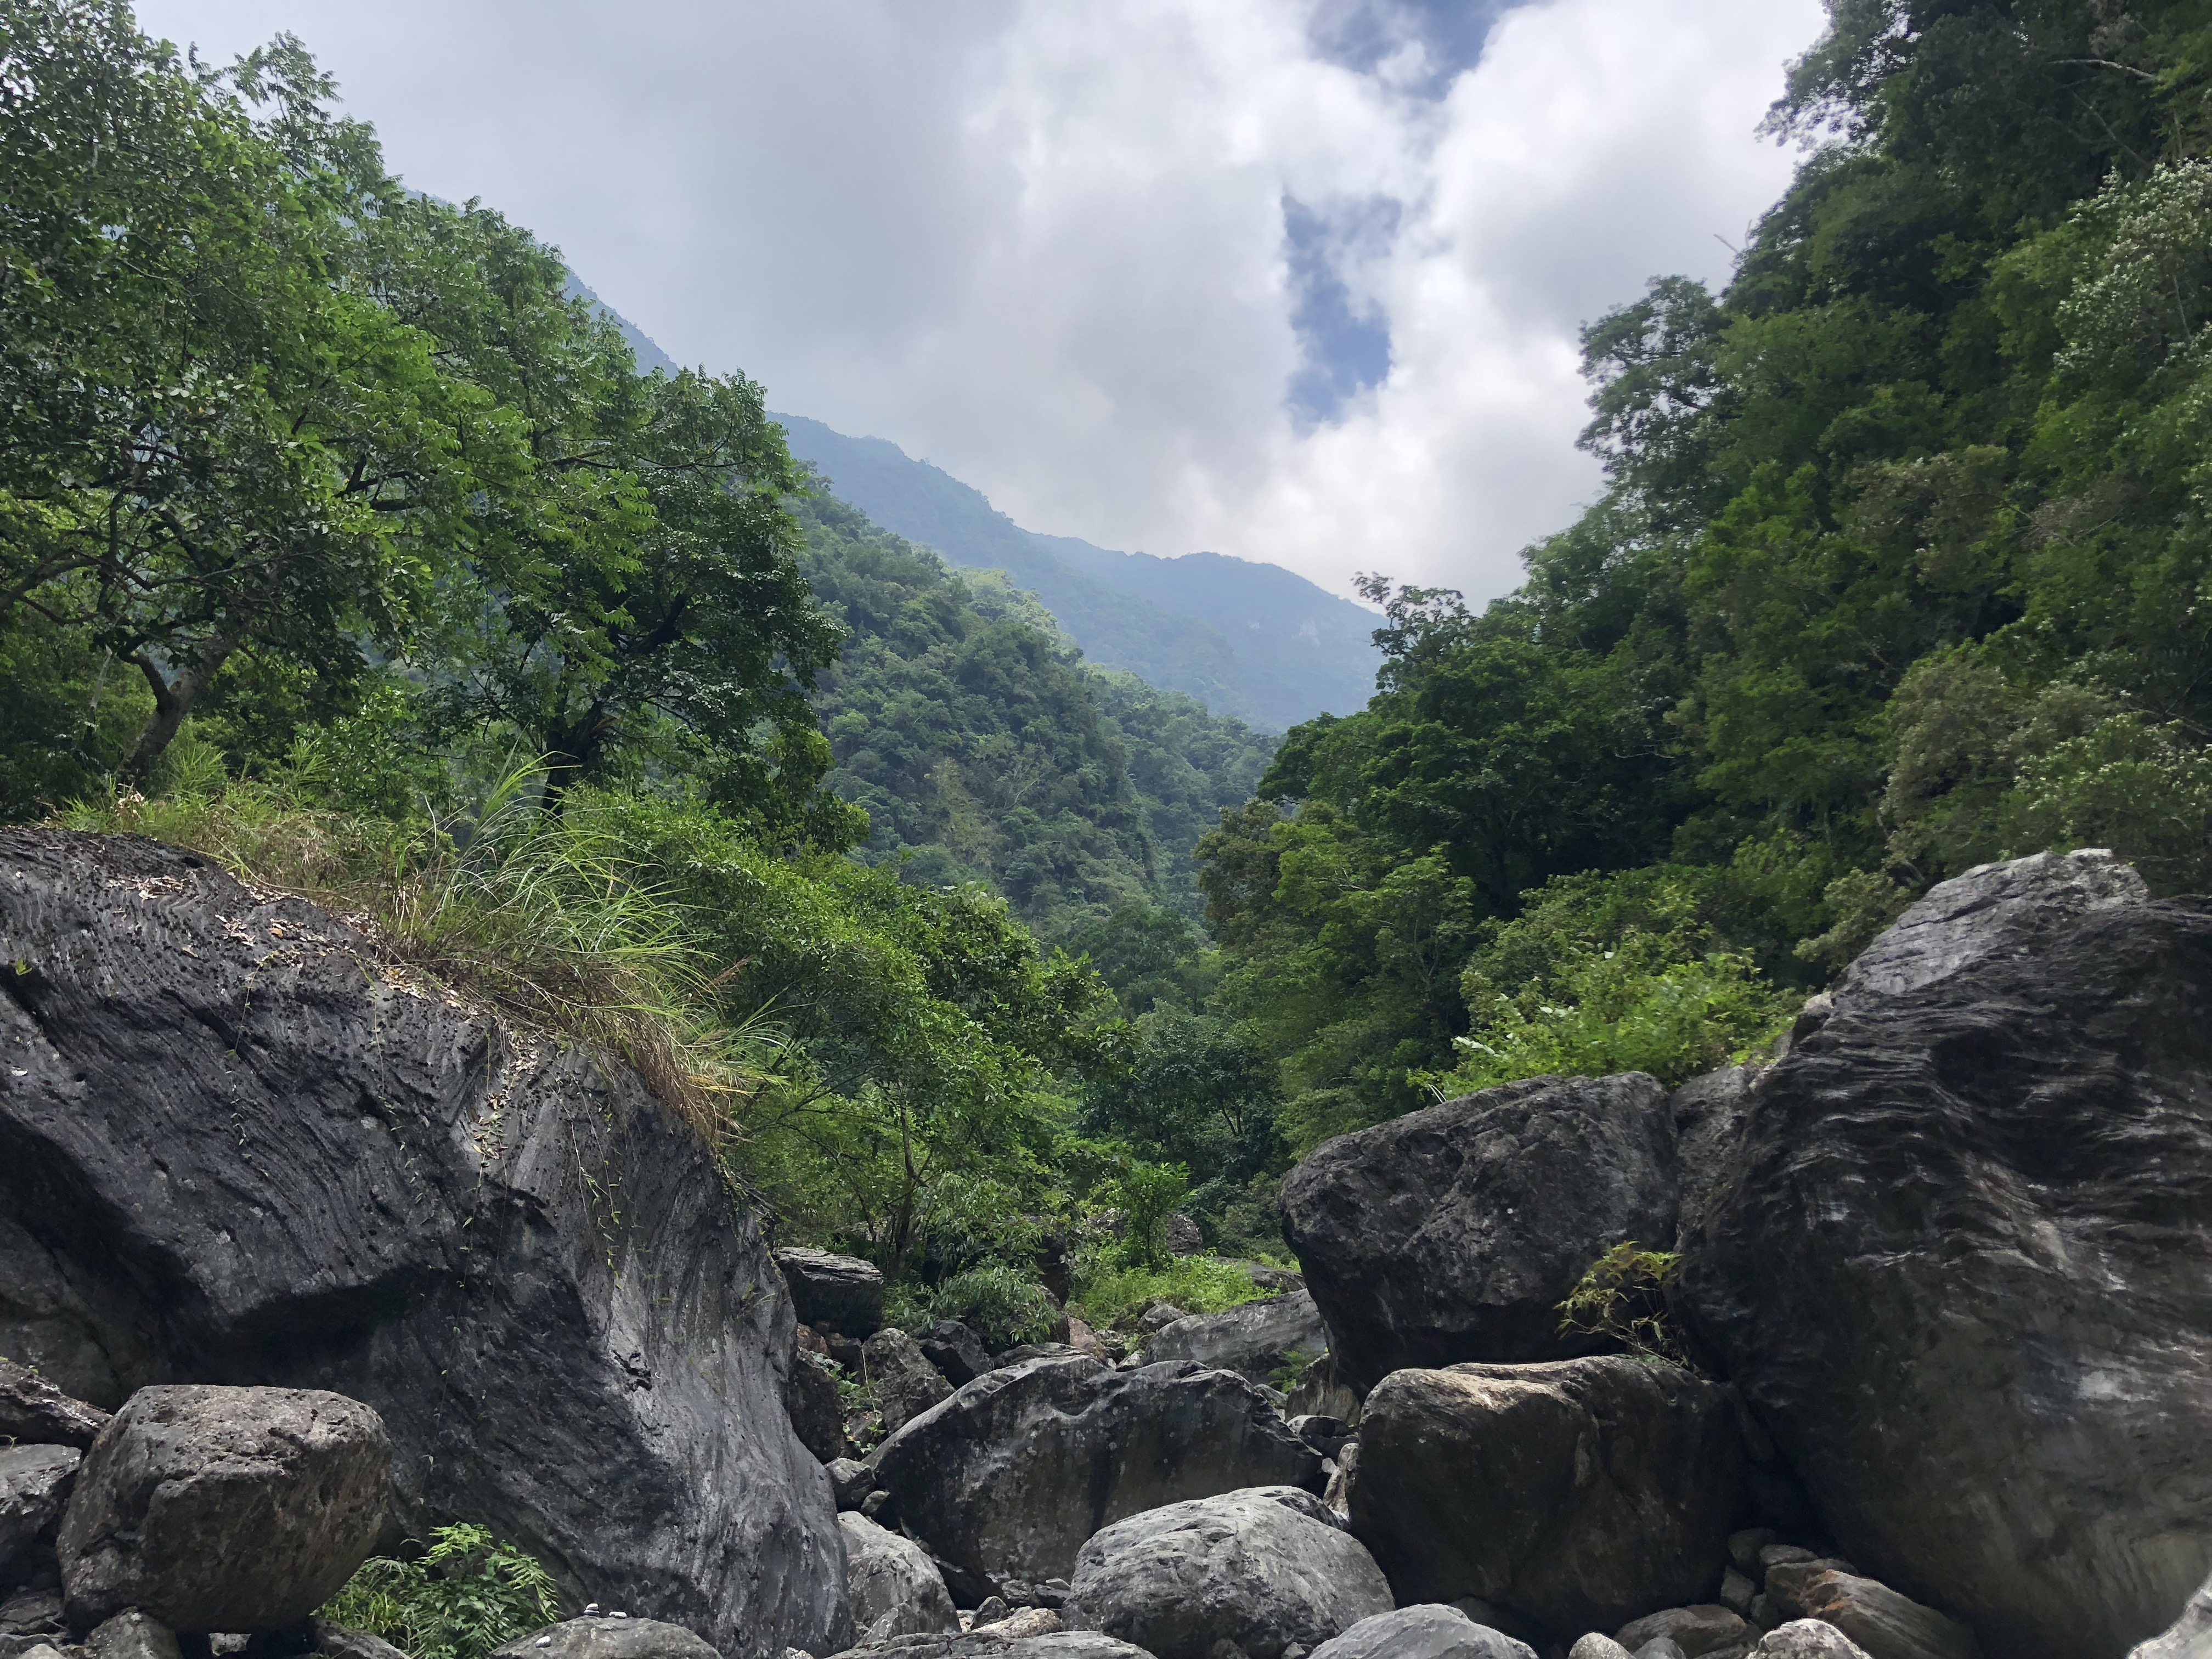 Valley in Taiwan